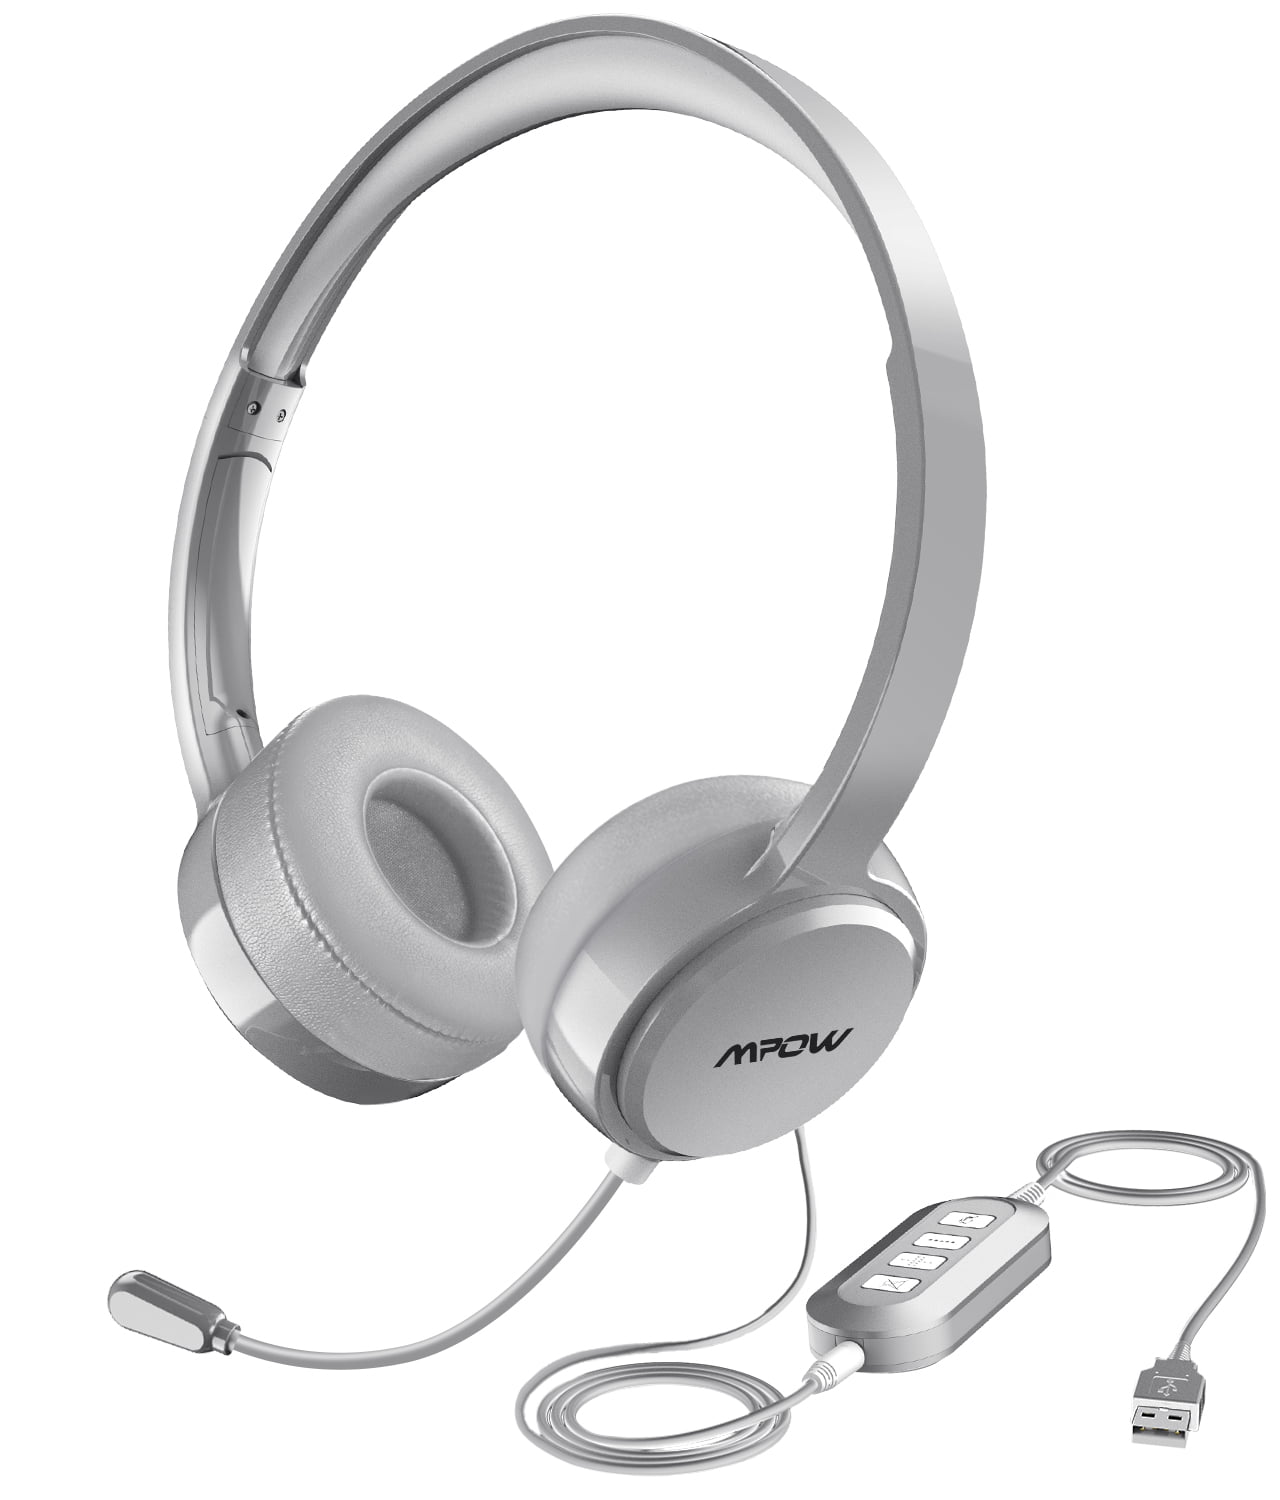 Lightweight Computer Headset with in-Line Volume Control Mpow 071 USB/3.5MM Kids Headphones with Microphone Noise Canceling Fit for K12 School Classroom Learning/Language Lessons/Online Study 